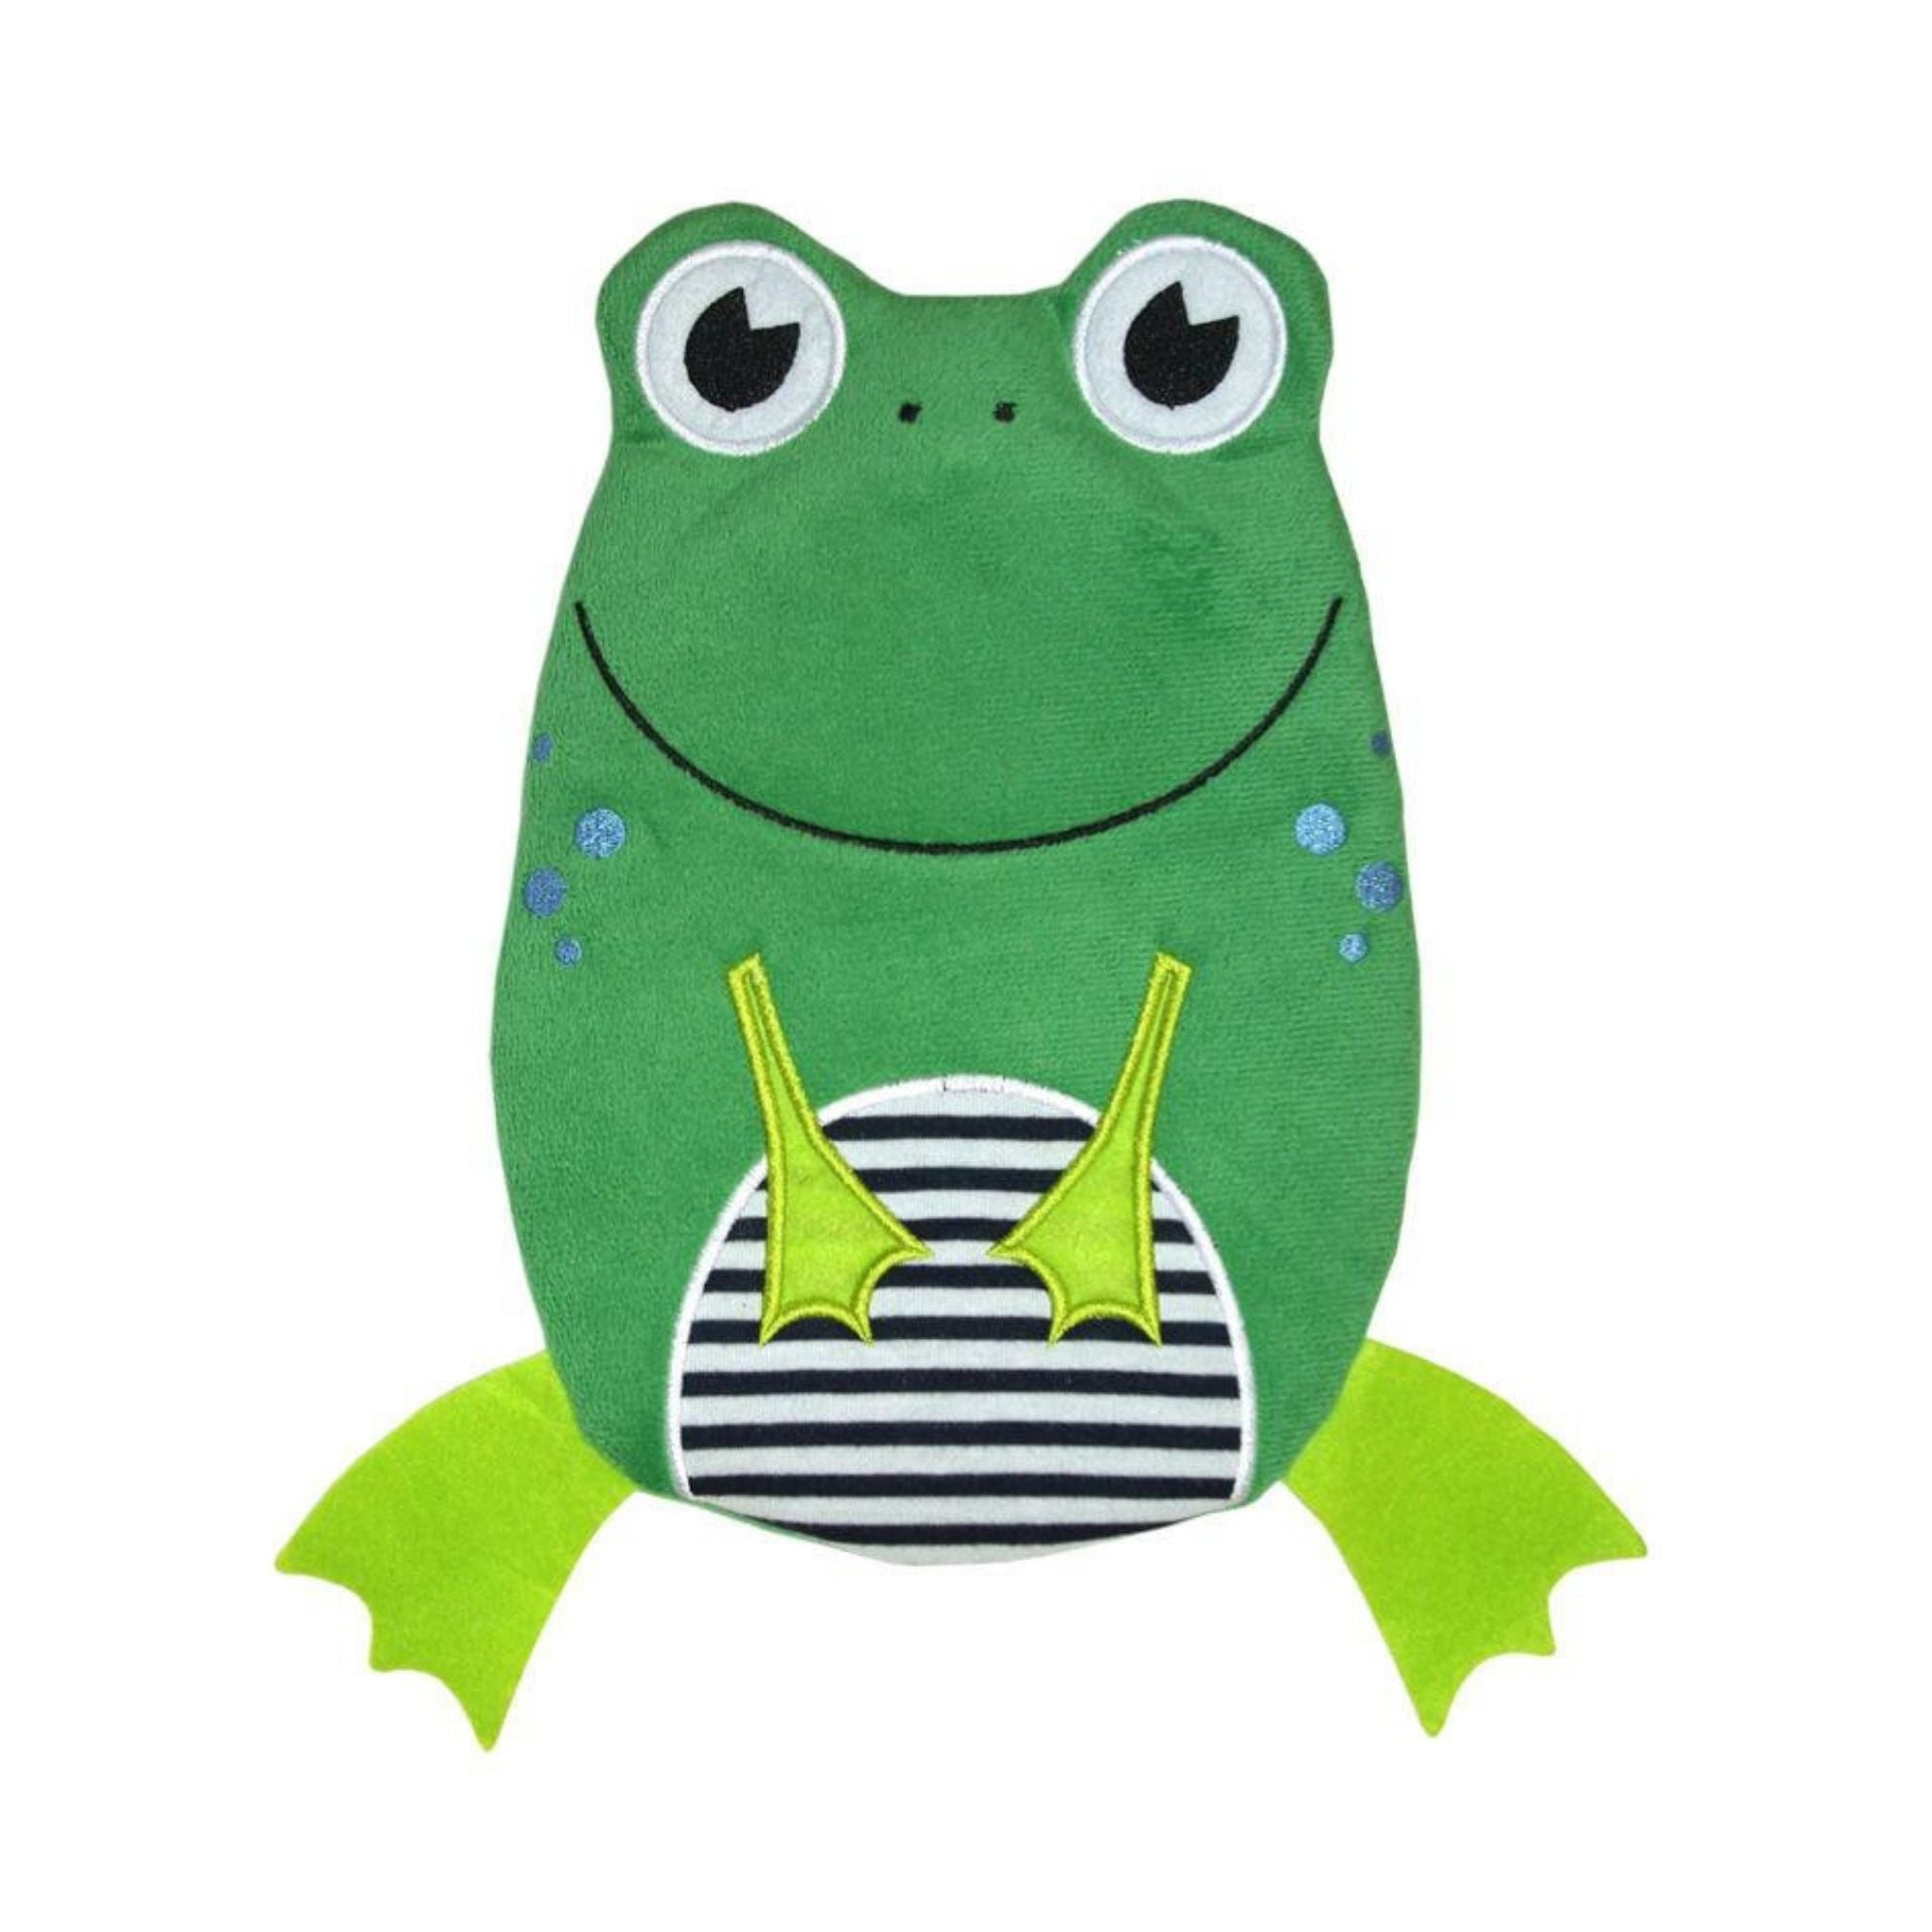 Hot Water Bottle Funny Colorful Cover For Kids Warmer - Frog